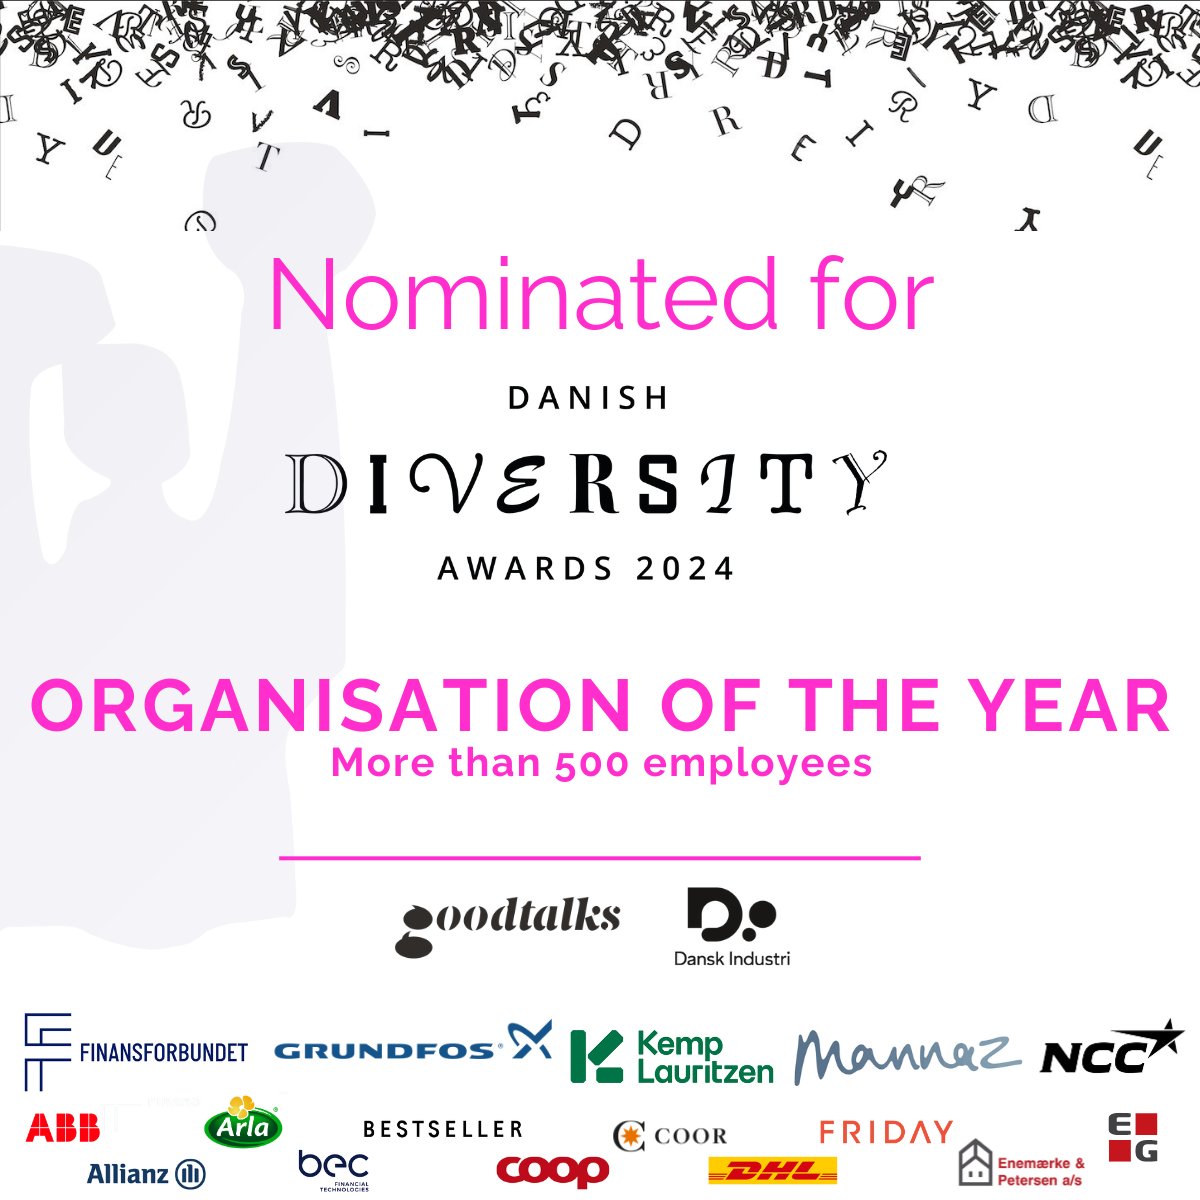 We’re thrilled to announce that MAN Energy Solutions has been nominated for Organisation of the Year, Danish Diversity Awards 2024, organized by Danish Industry & Goodtalks!